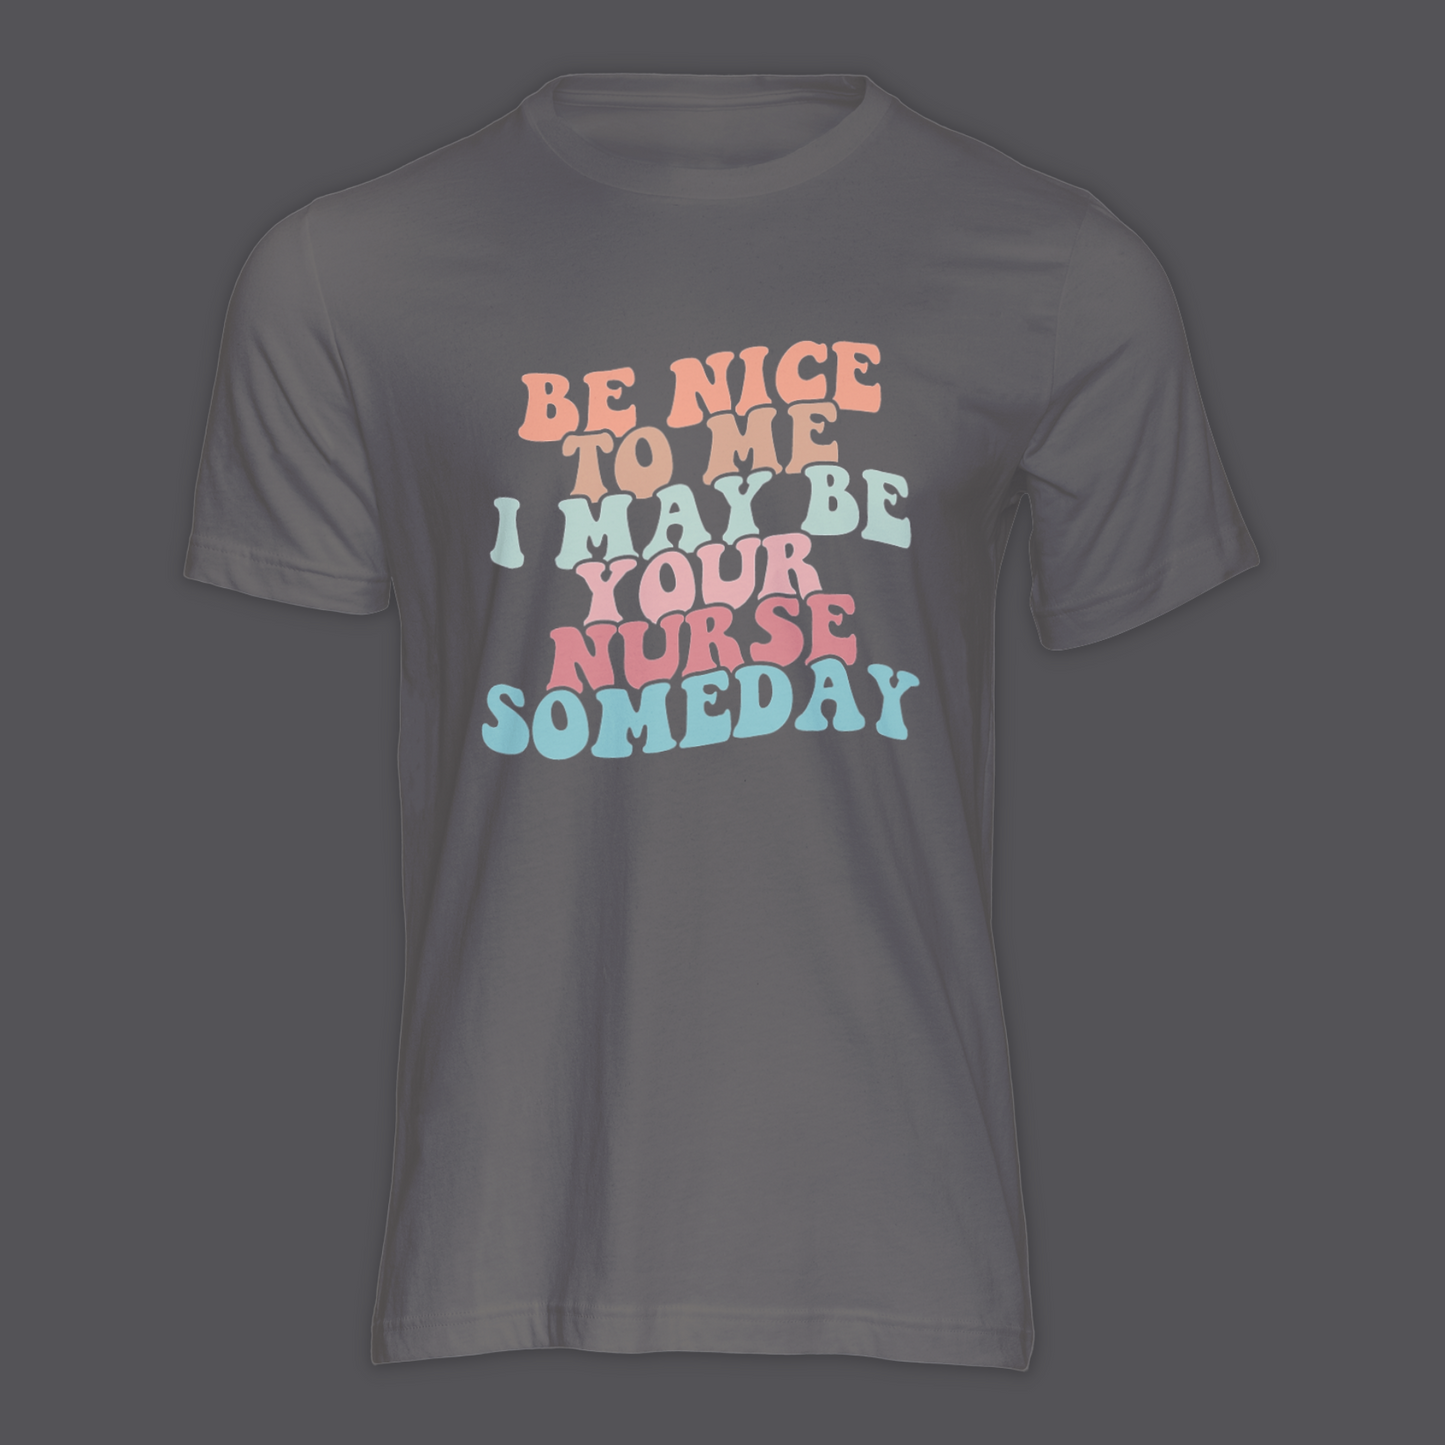 I May Be Your Nurse Someday - Shirt